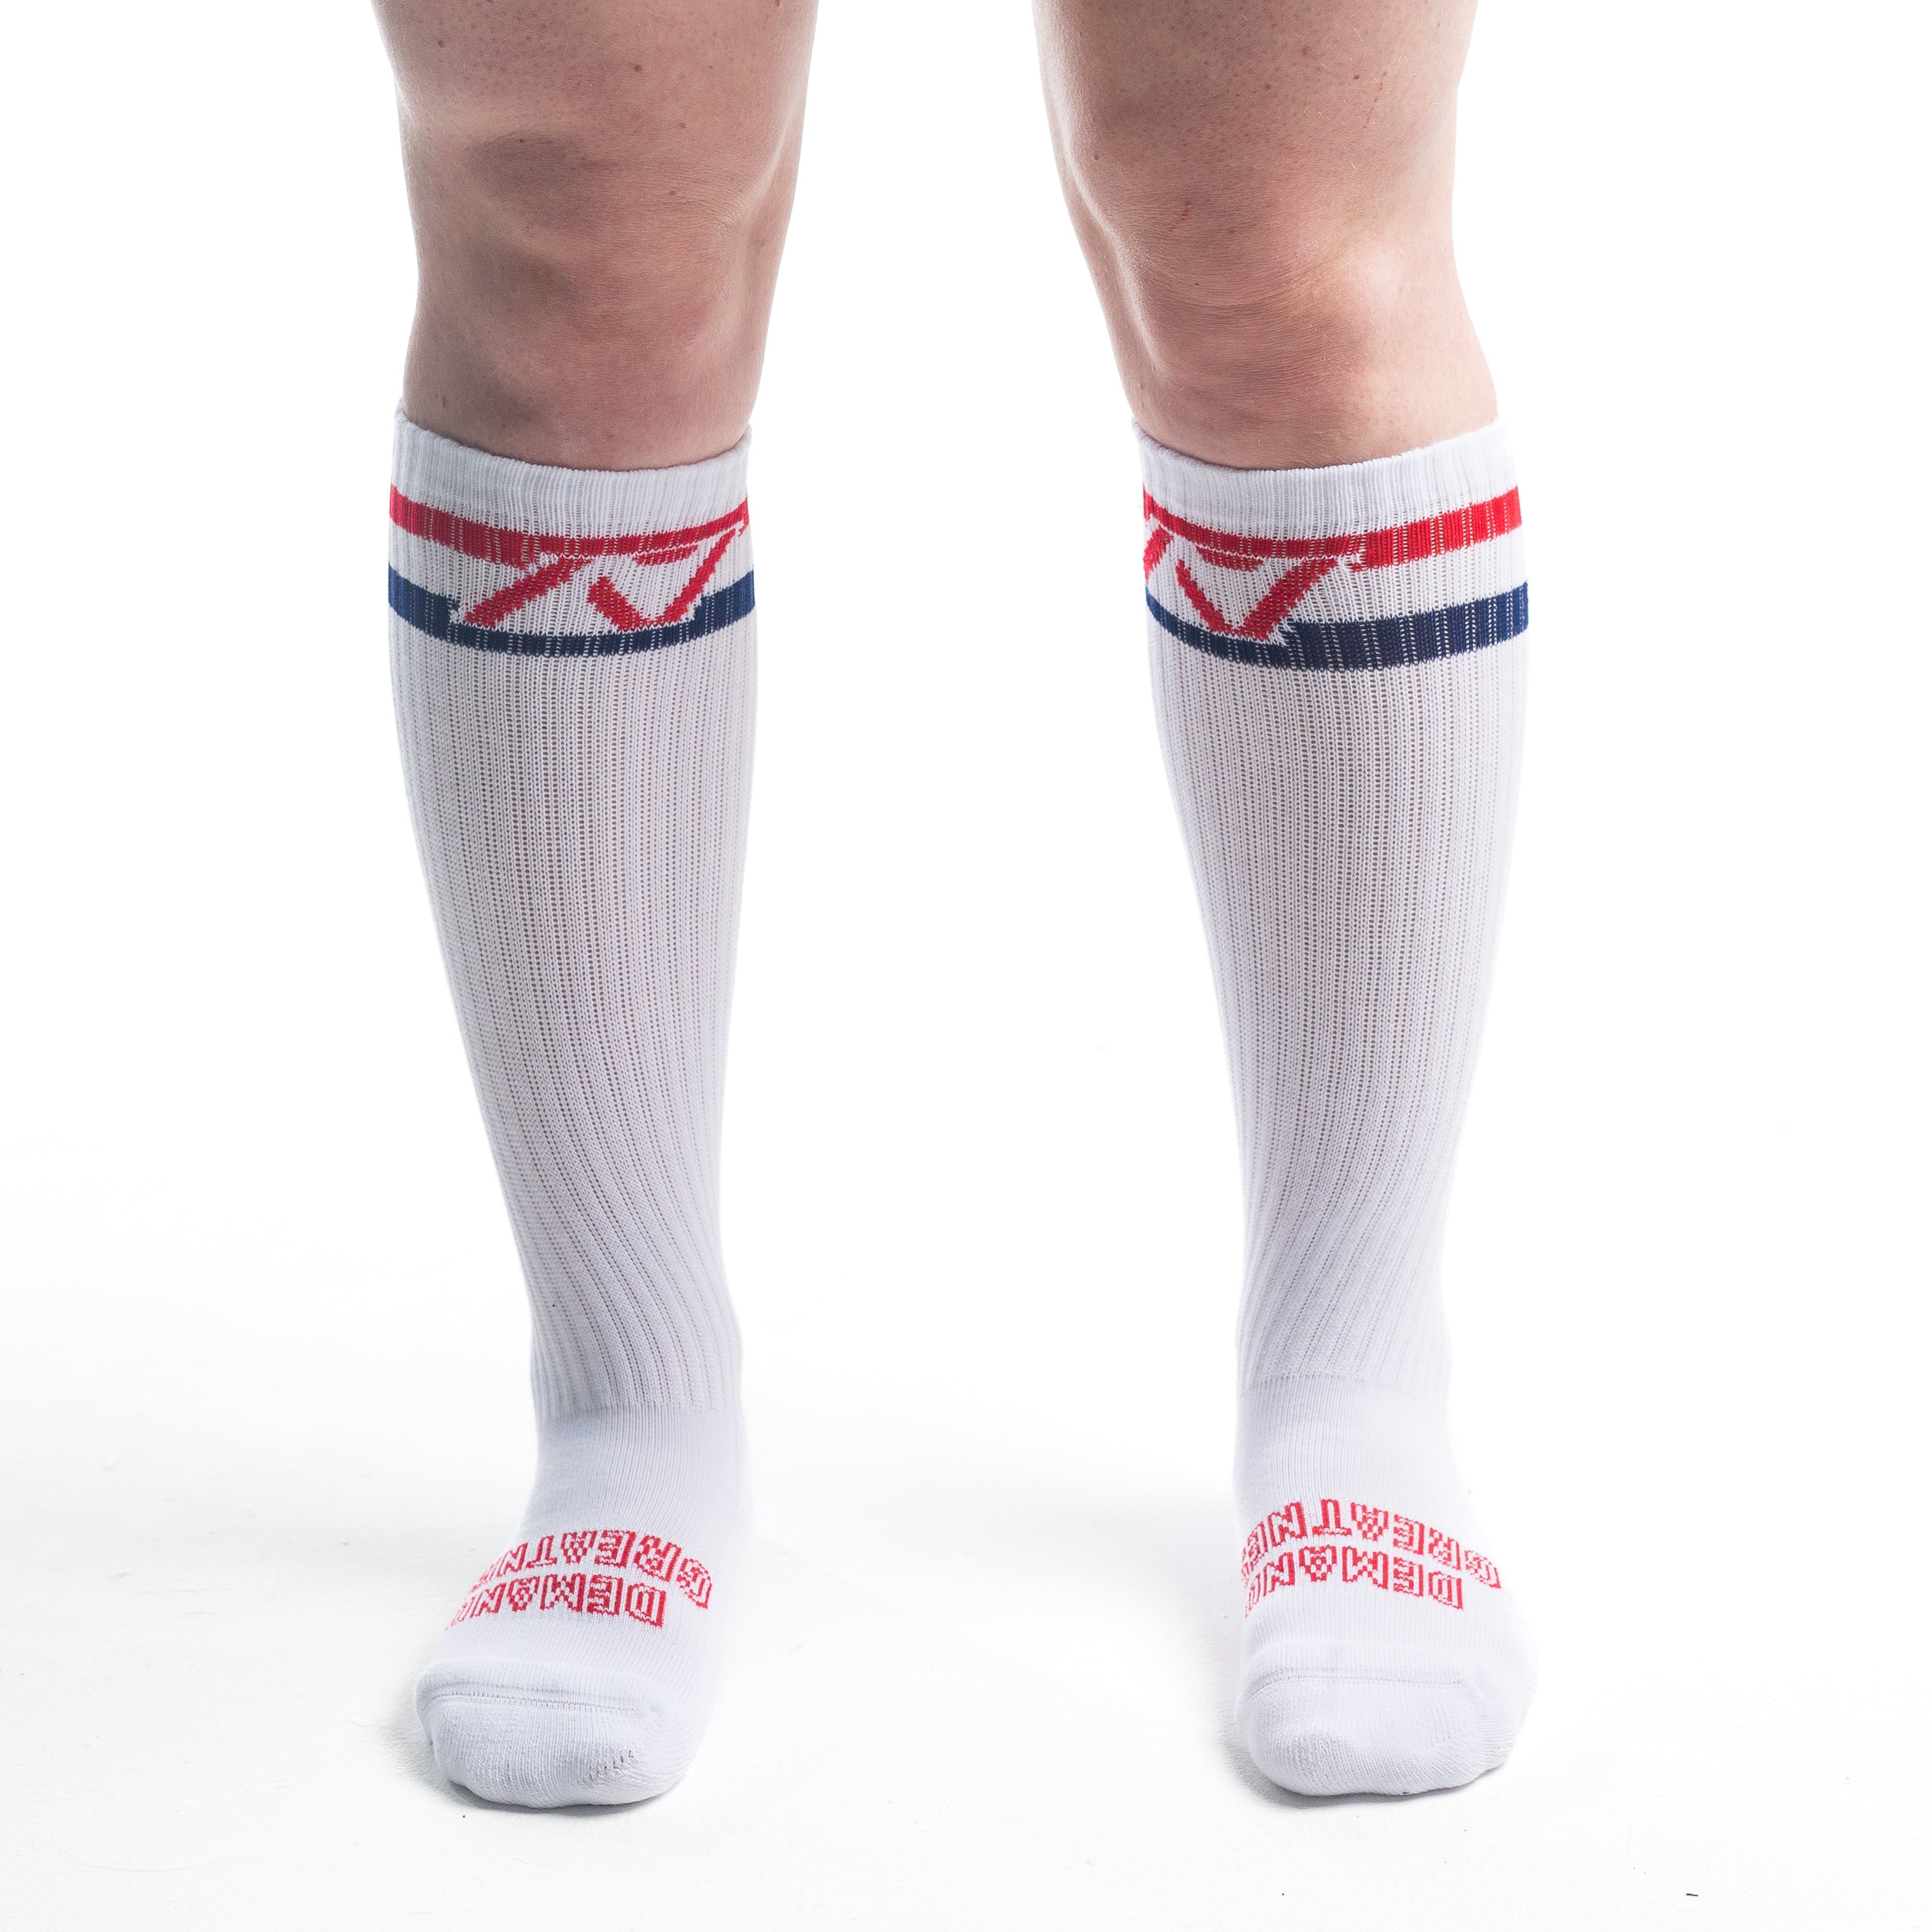 A7 RWB Crew socks showcase redm, white and blue logos and let your energy show on the platform, in your training or while out and about. The IPF Approved Night Light Meet Kit includes Powerlifting Singlet, A7 Meet Shirt, A7 Zebra Wrist Wraps, A7 Deadlift Socks, Hourglass Knee Sleeves (Stiff Knee Sleeves and Rigor Mortis Knee Sleeves). All A7 Powerlifting Equipment shipping to UK, Norway, Switzerland 